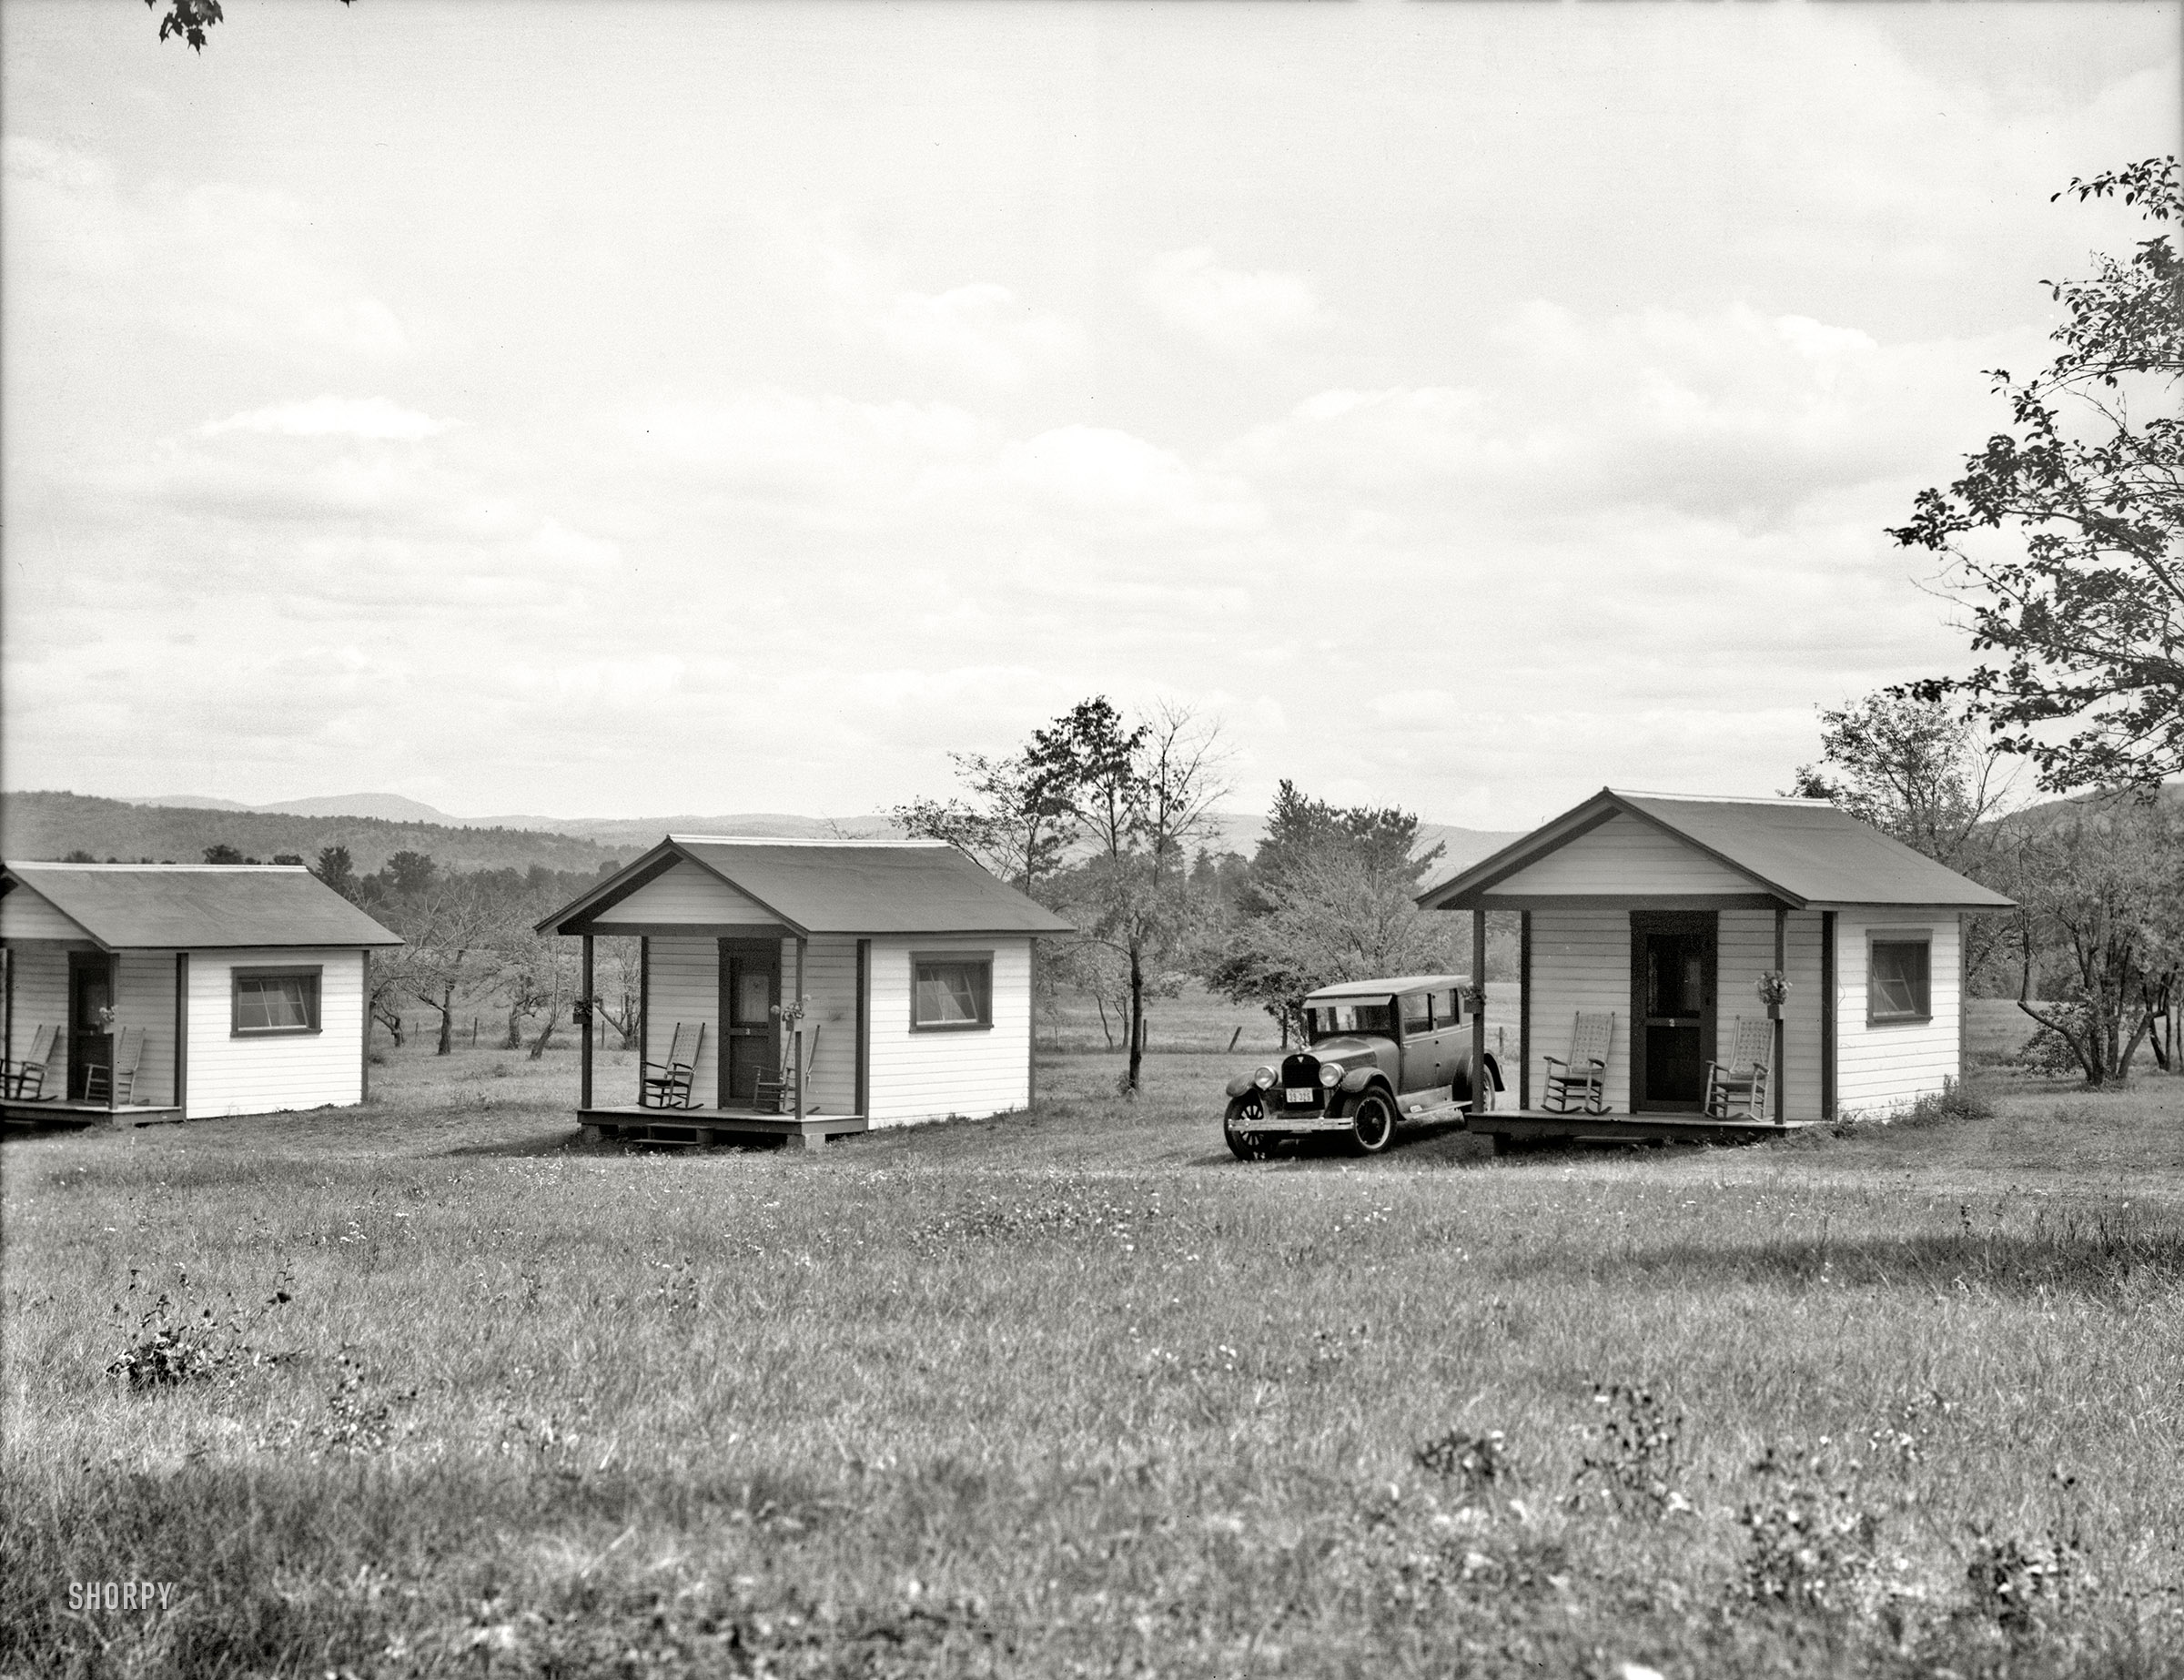 March 1936, somewhere in Georgia. "Tourist cabins." Medium-format nitrate negative by Walker Evans for the Resettlement Administration. View full size.